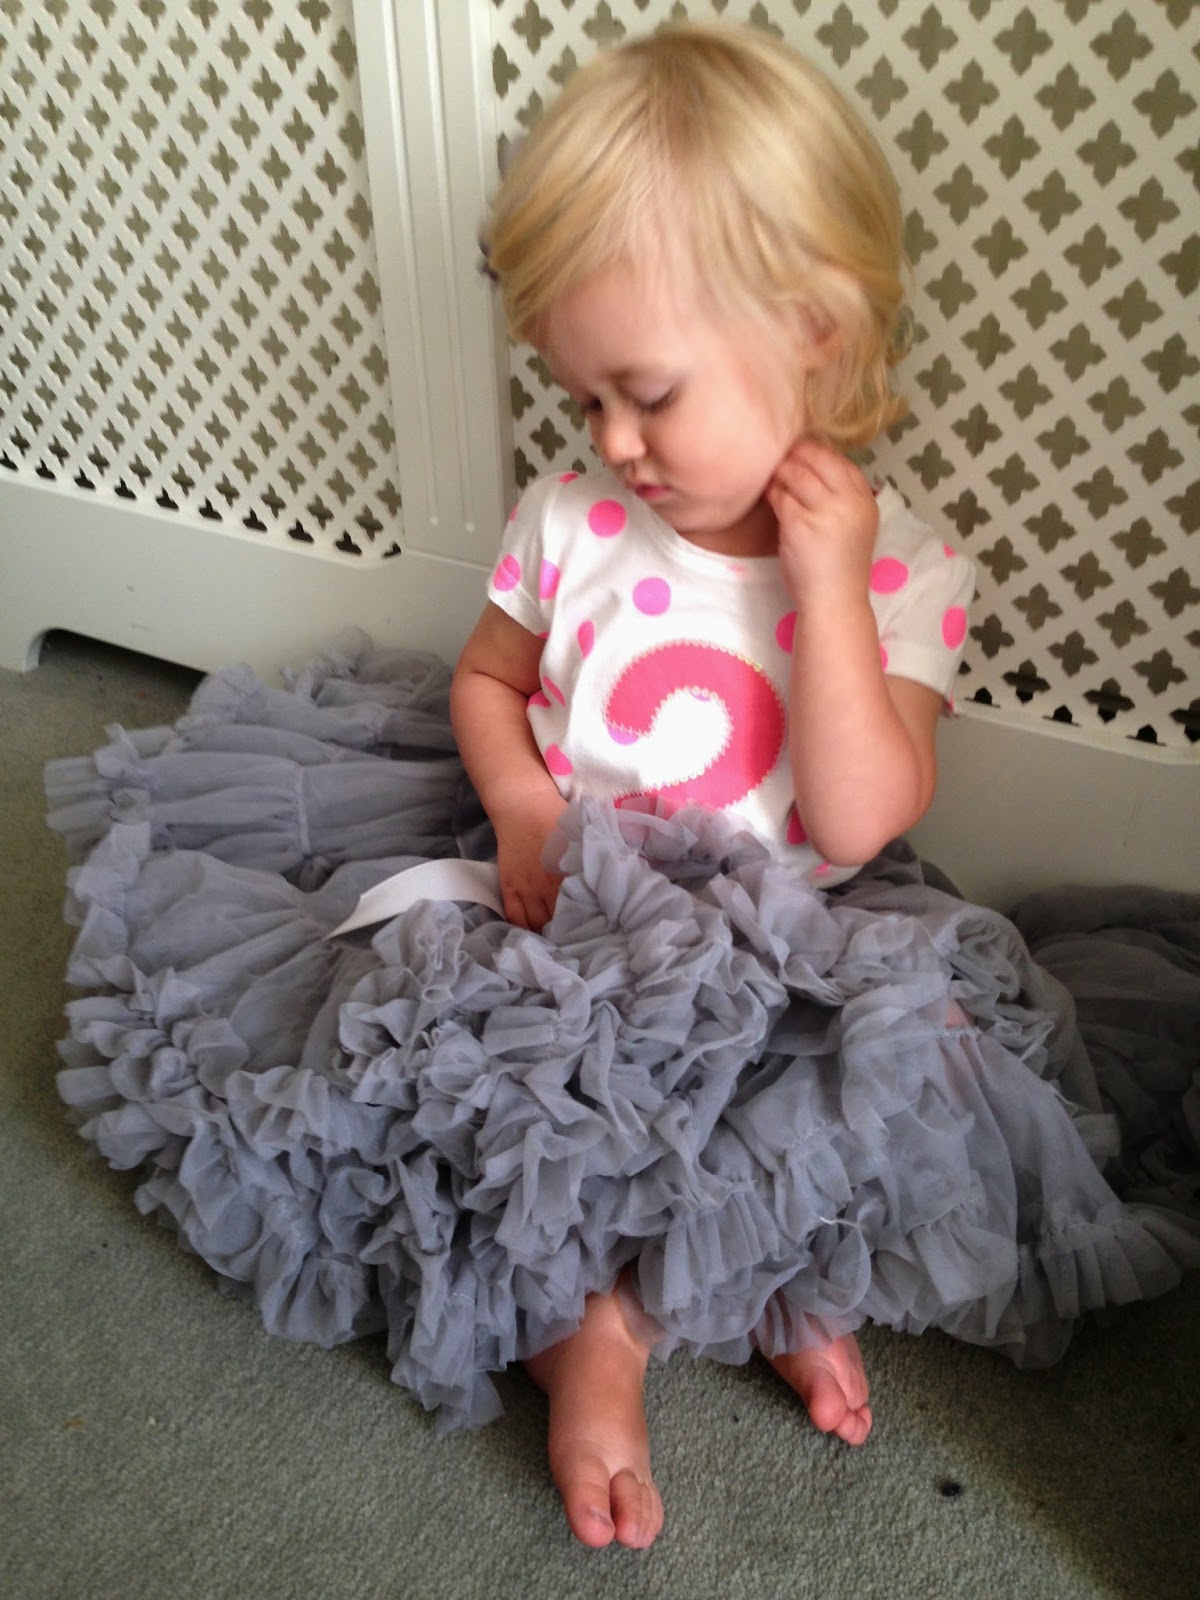 Have you met Miss Francis - the tutu Fairy Godmother? | Miss Francis | party outfits | tutus |pettiskirts | mamasVIb | janet Frnics |make-up artist | stylist | marilyn monroe in tutu | sraha jessica parker in tutu | tutu | how to style your tutu | how to wash and care for tutu | mamas VIB | blog | fashion | kids clothes | party looks | interview with janet francis | girls clothes | skirts | petty skirts